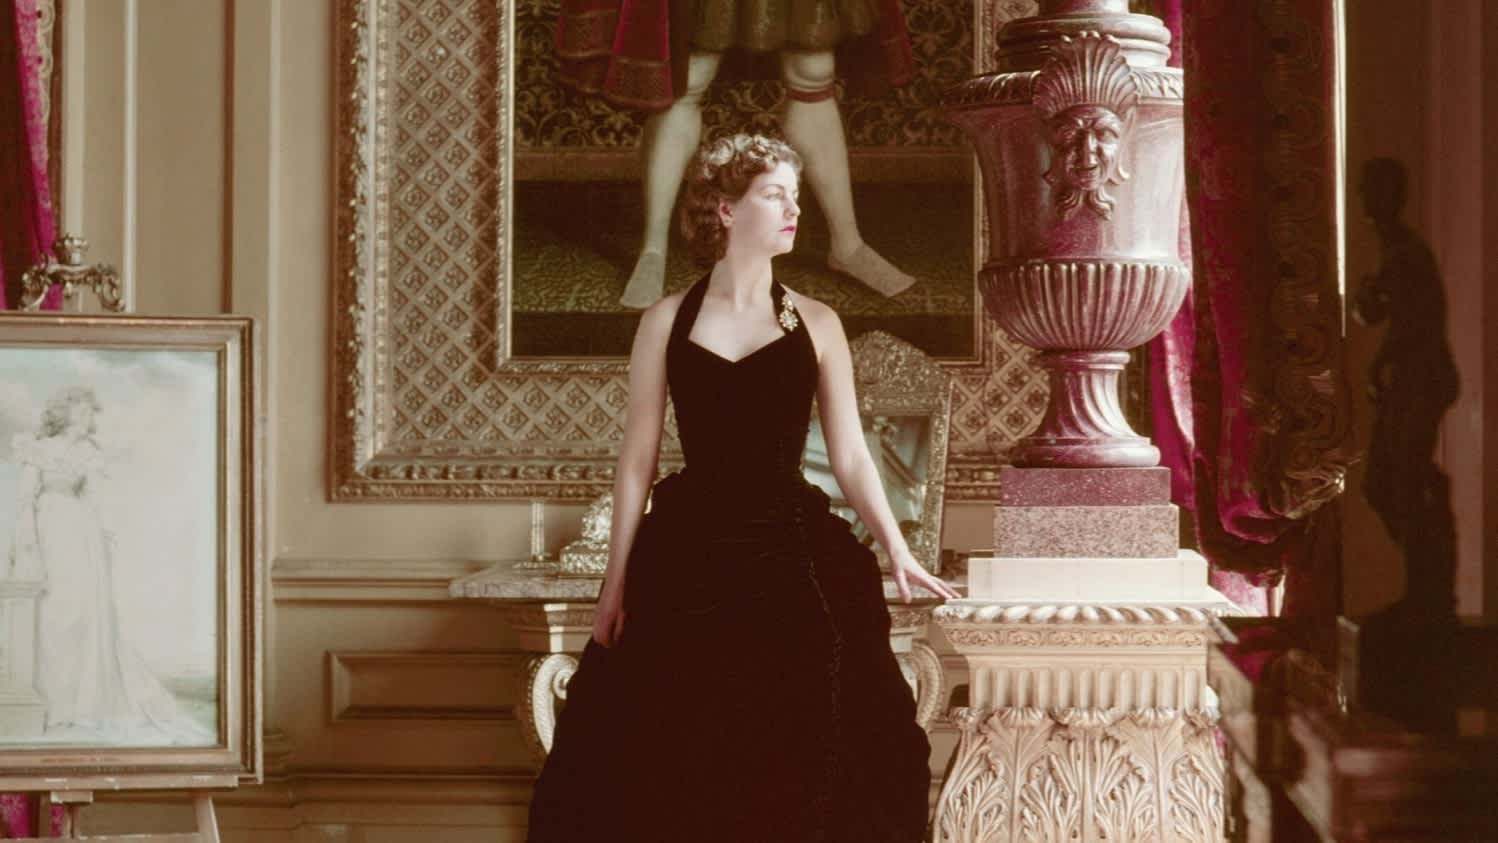 An elegant woman in a black evening gown stands poised in a lroom with richly patterned walls, beside a large framed portrait of a regal figure, with a white dog sleeping in a beam of sunlight on the carpet